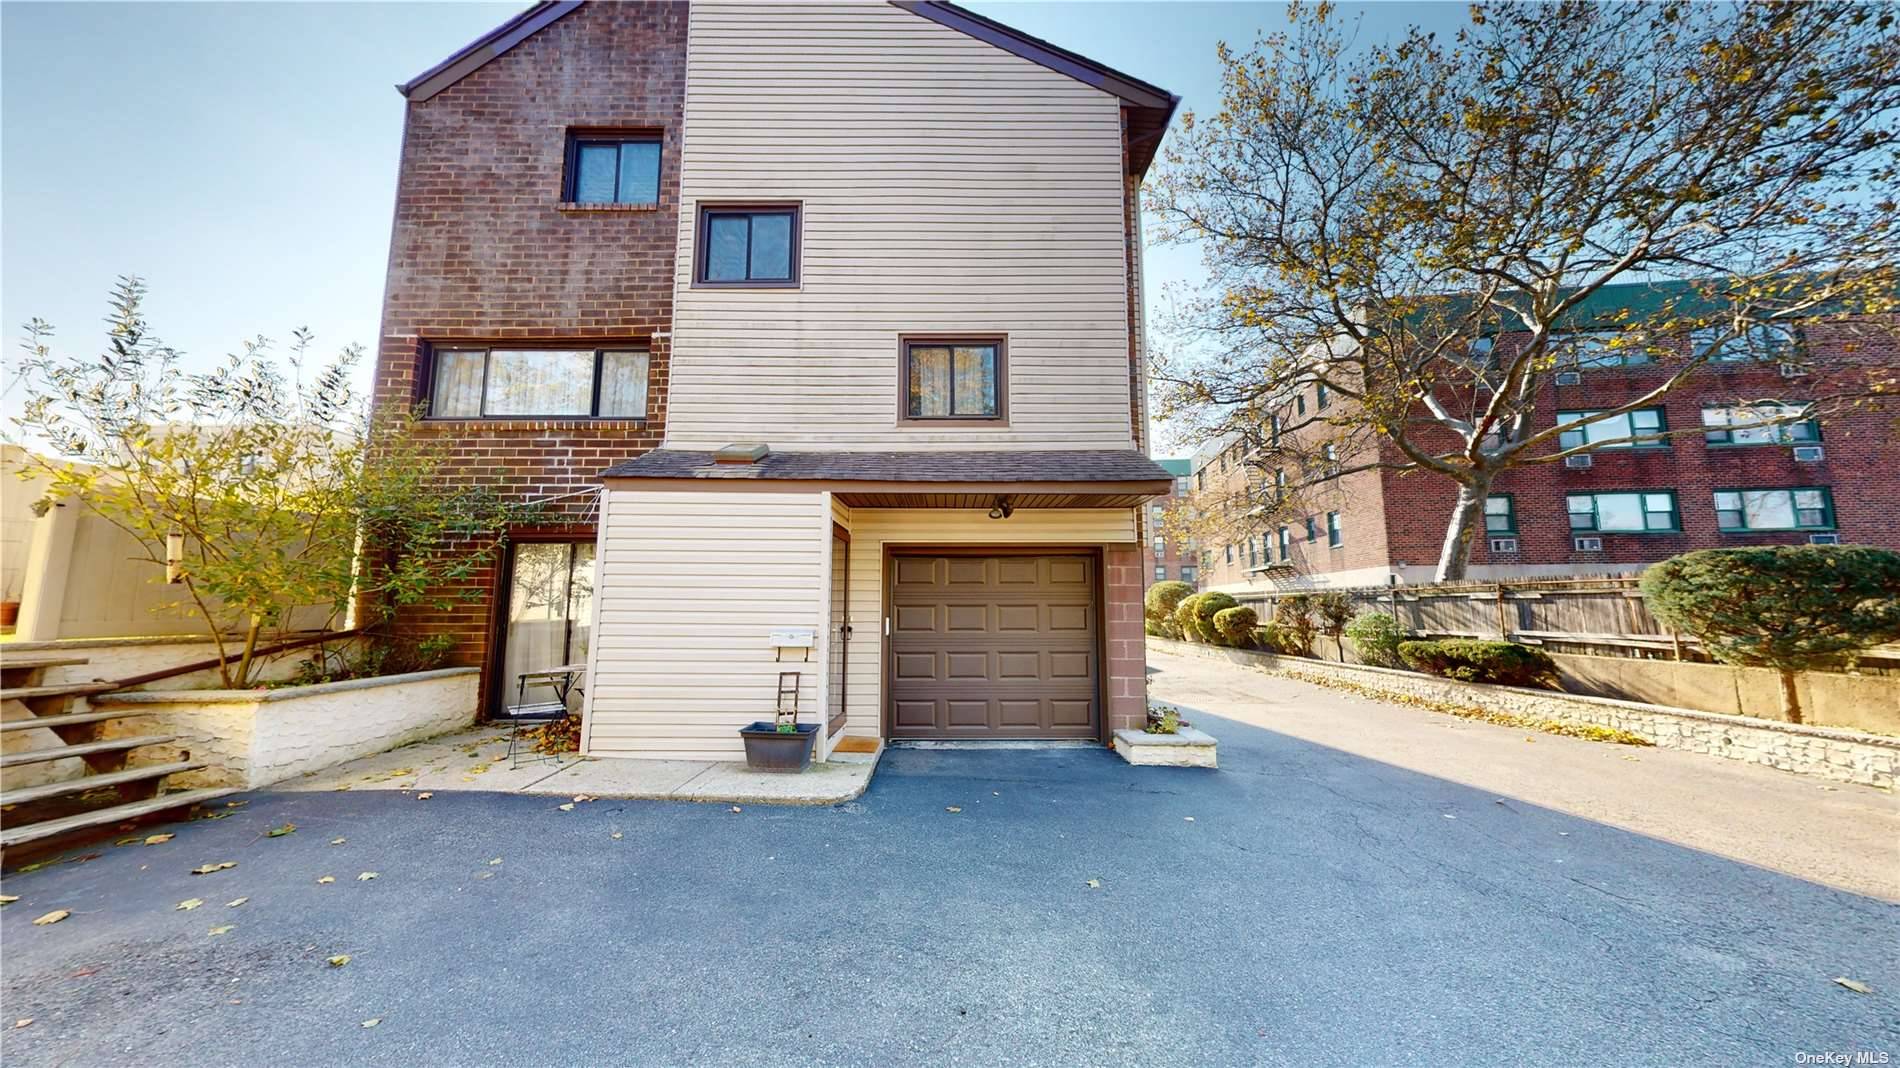 Rare Immaculate 3 Story Townhouse w Attached Private Indoor Garage amp ; 1 Additional Outdoor Parking Space.